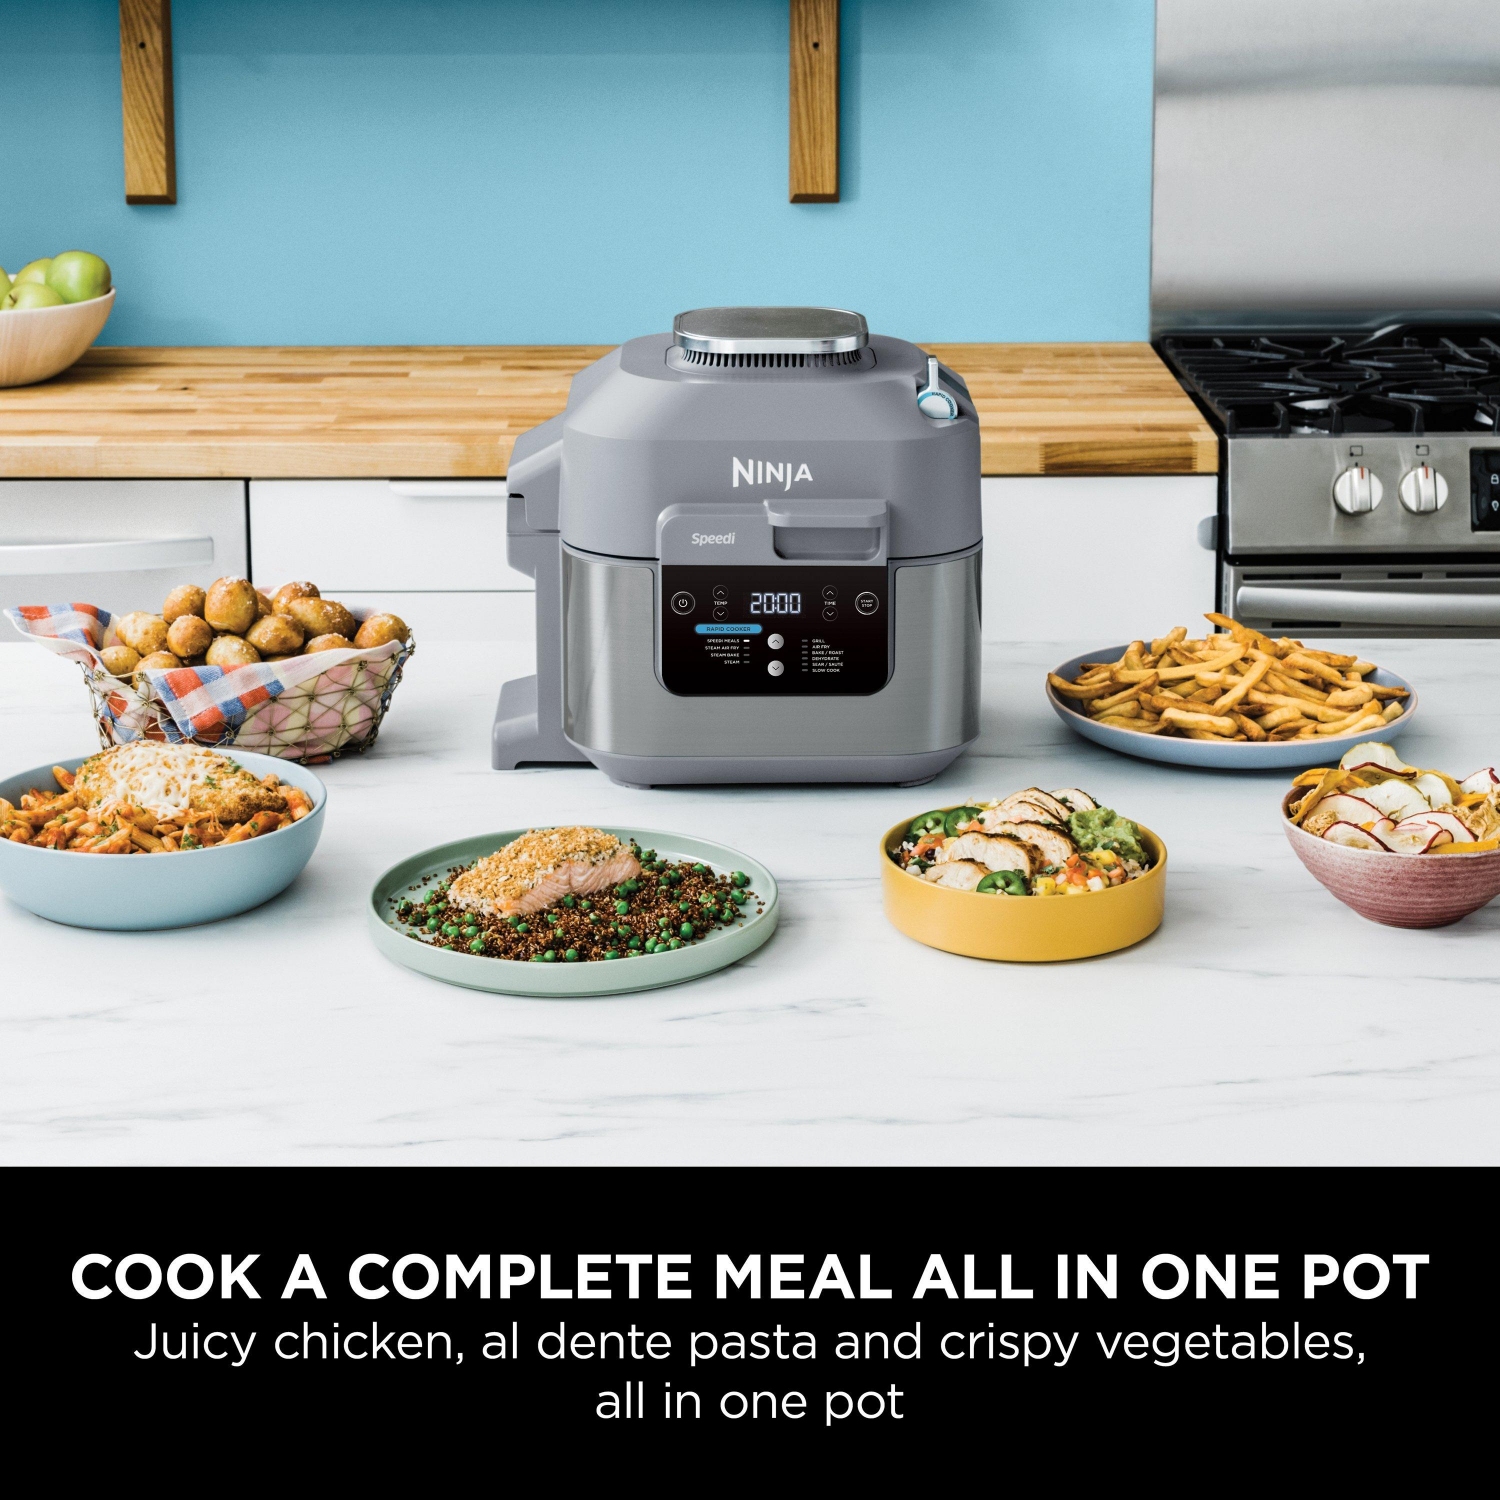 Delicious Meals Made Easy ft. the Ninja Speedi Rapid Cooker & Air